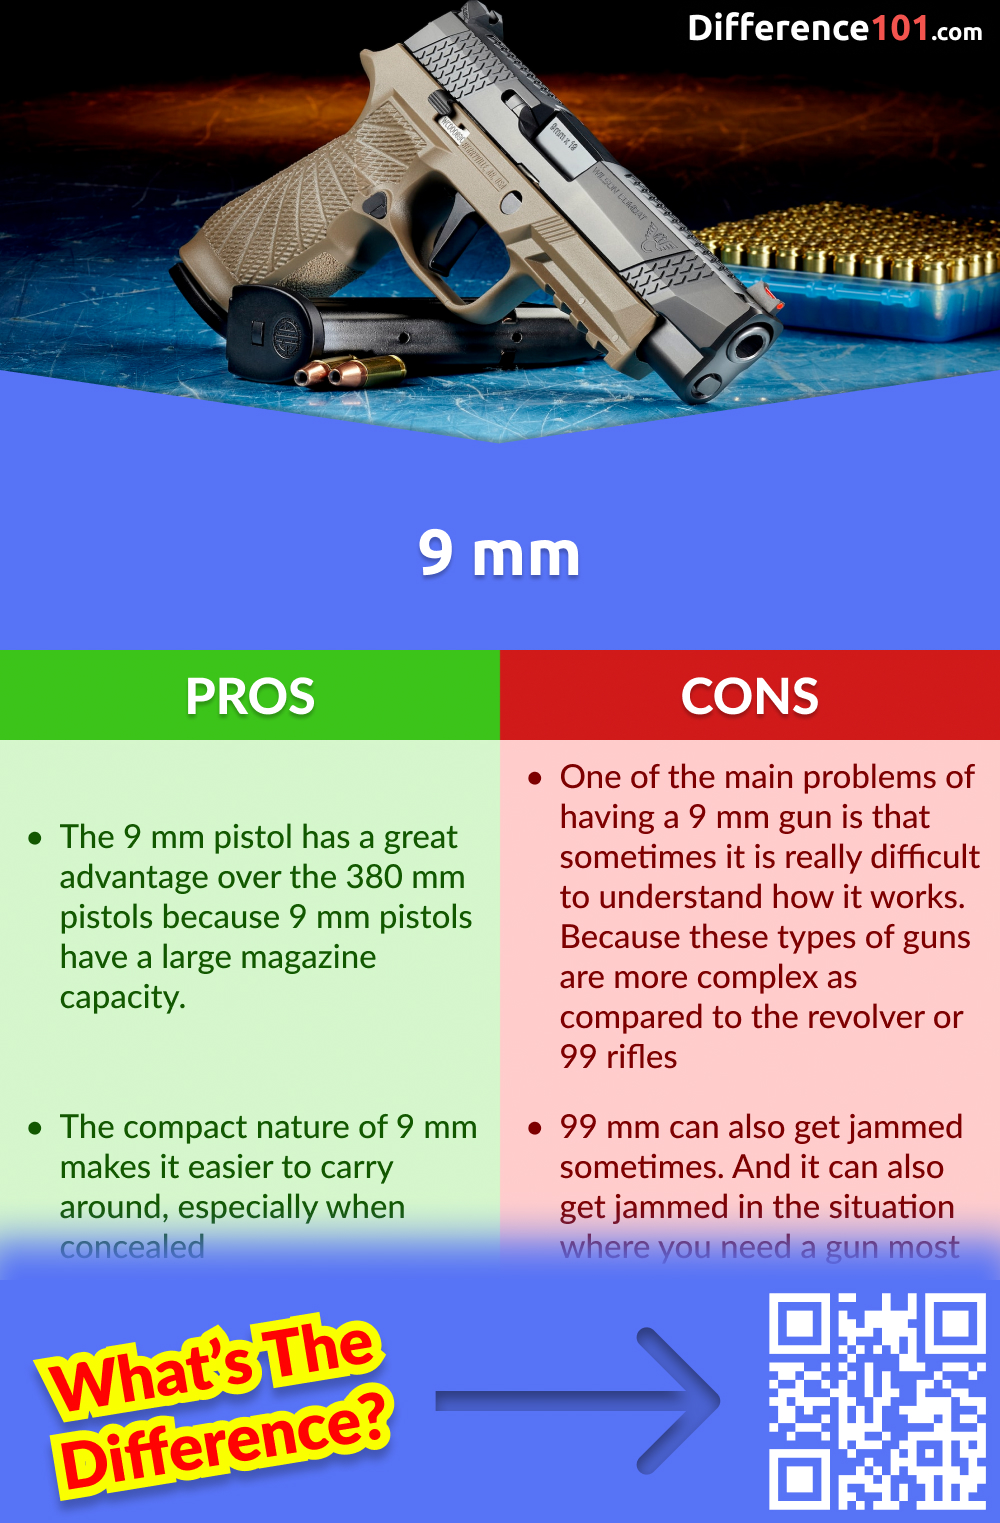 9 mm Pros and Cons